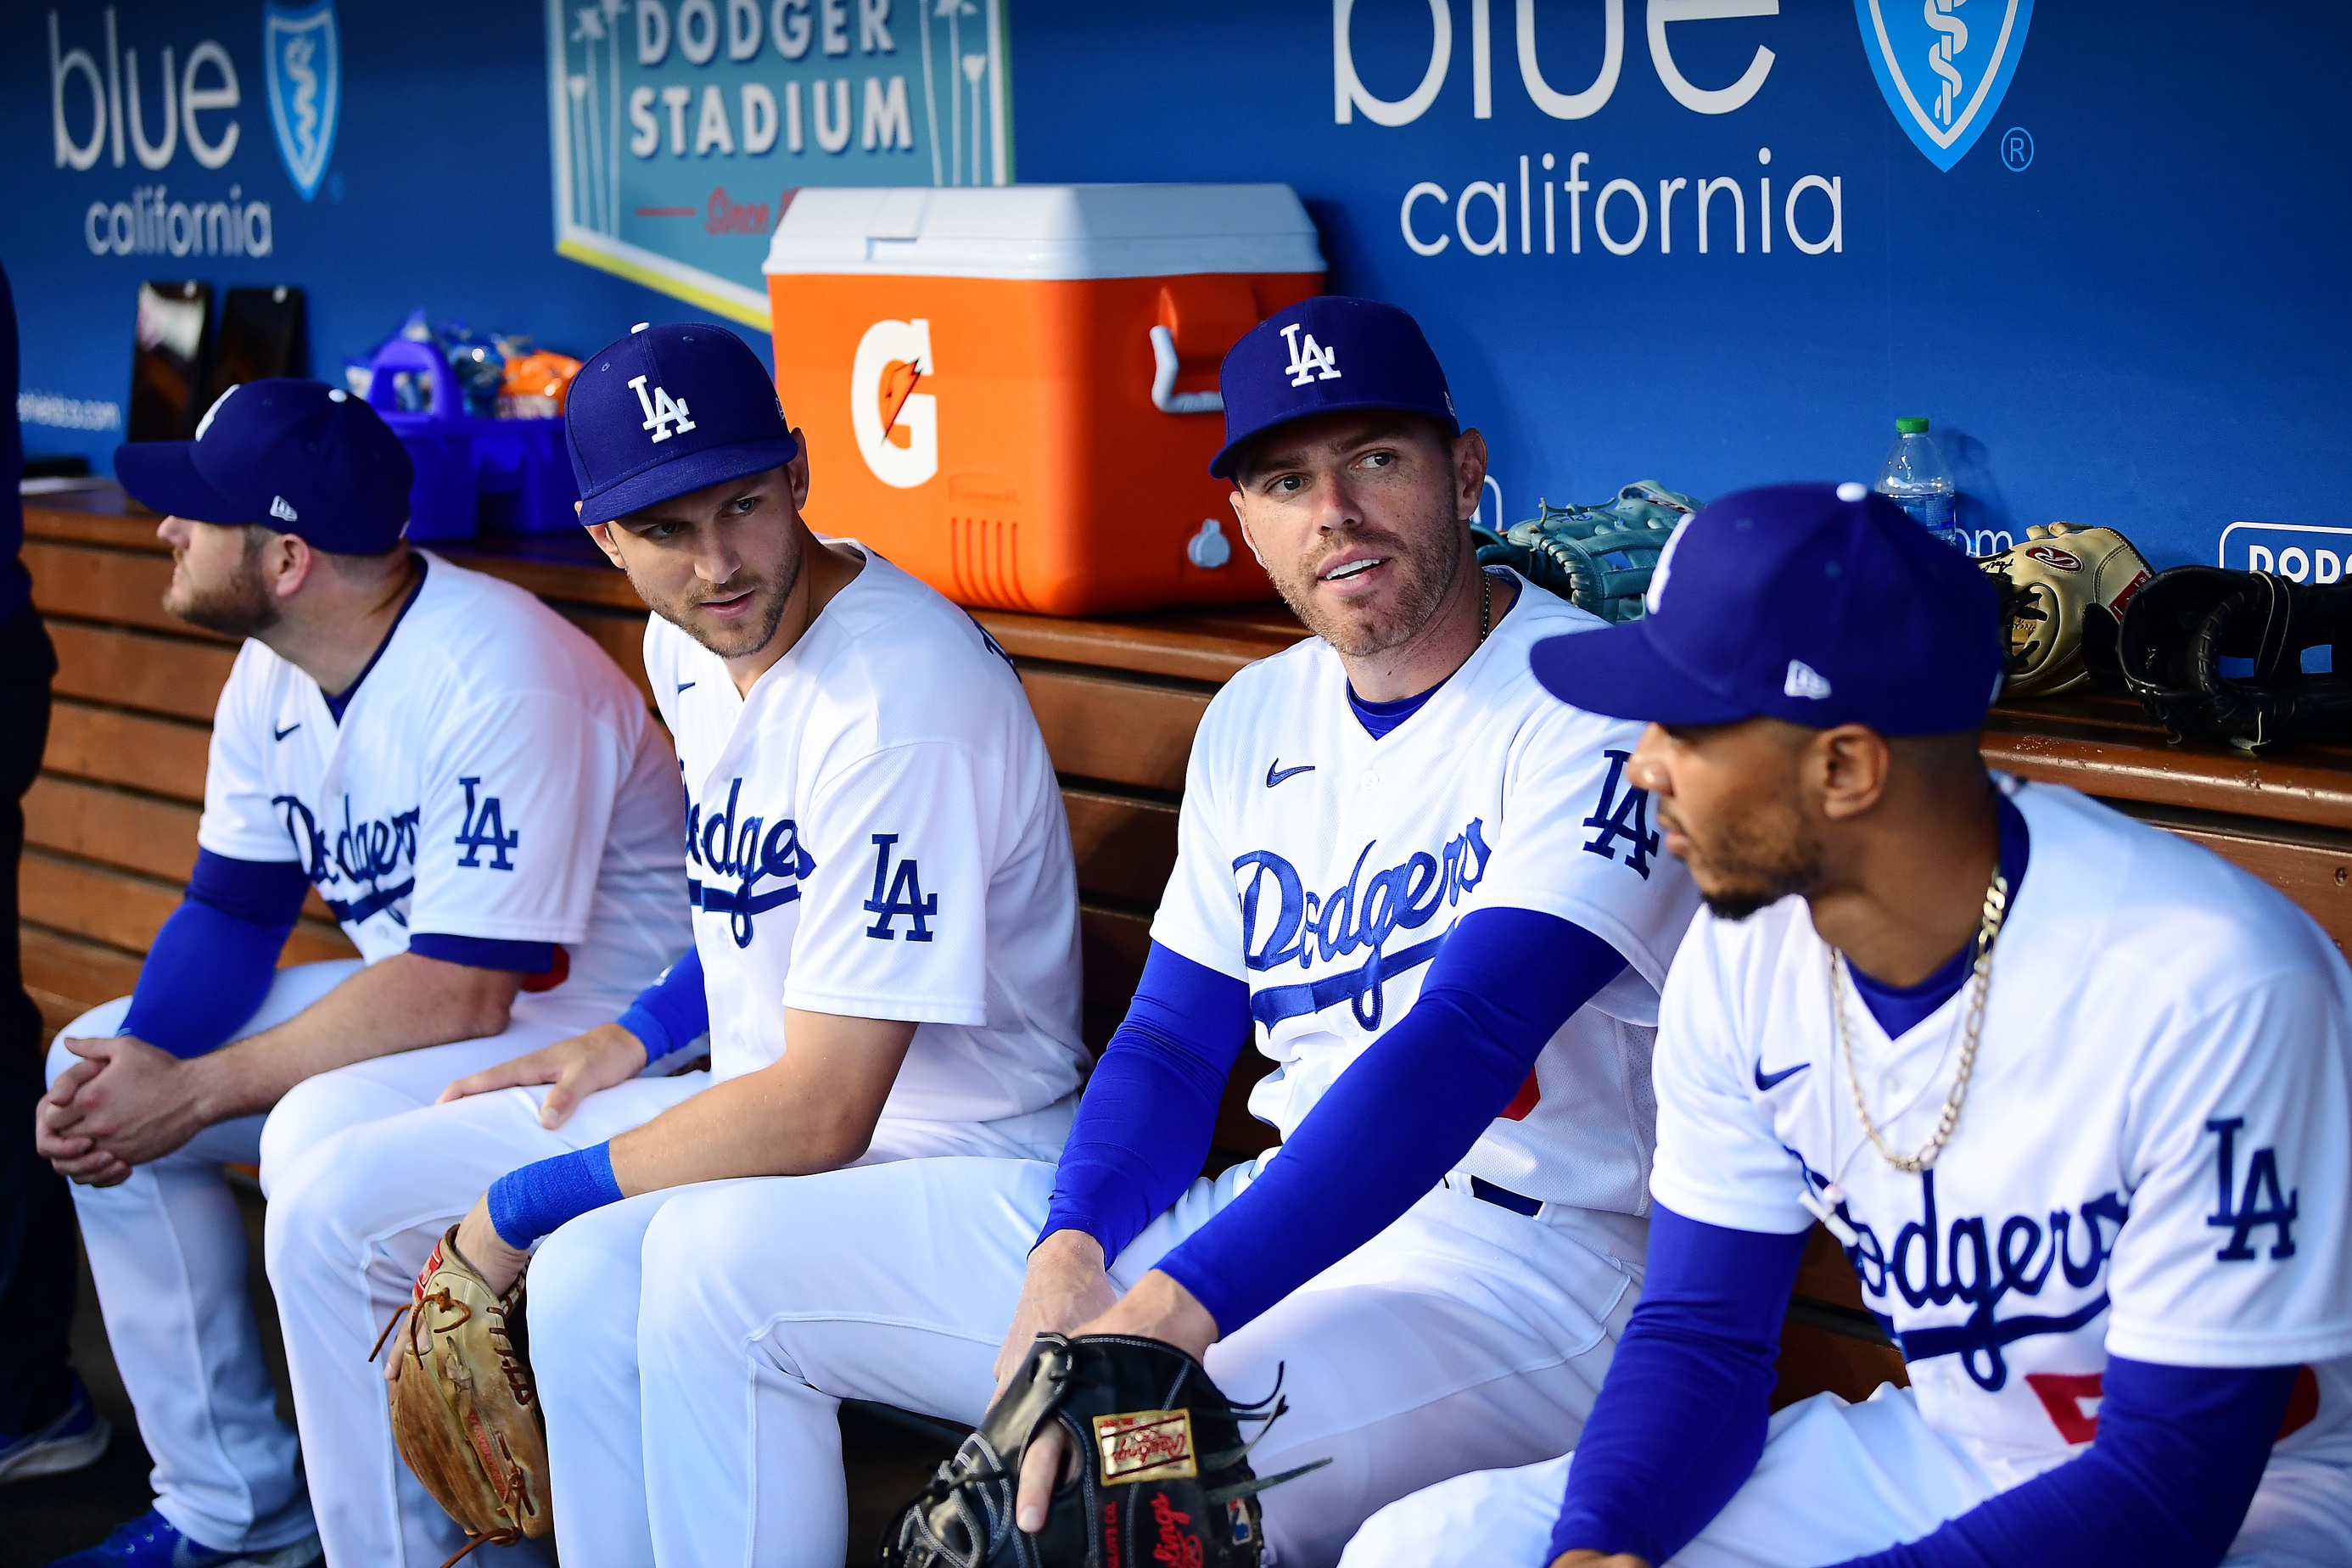 Dodgers Team Insider Thinks LA Could Trim Payroll This Offseason